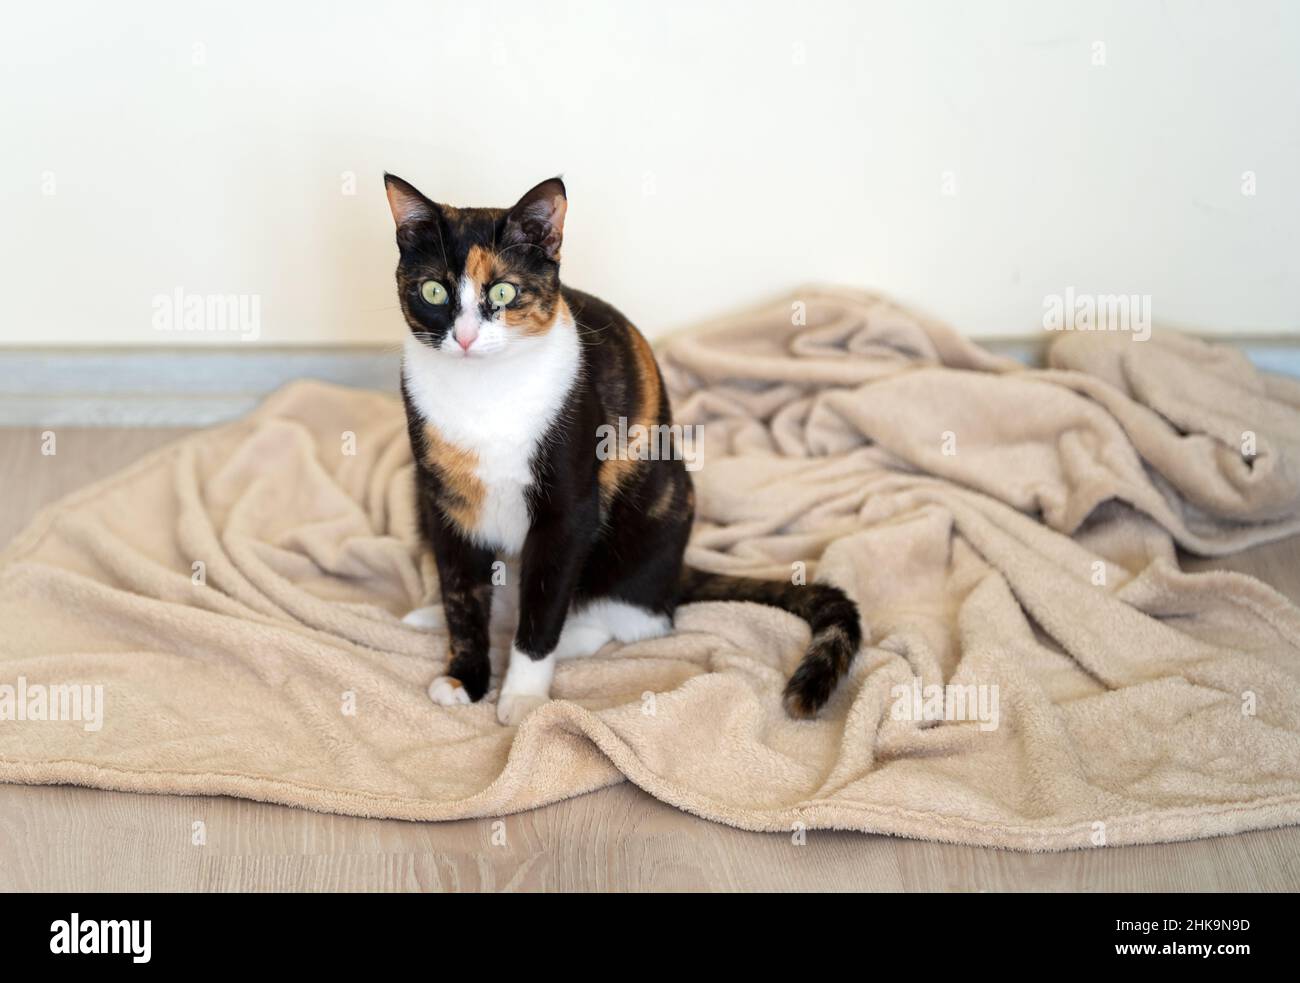 Close up photo of spoiled domestic cat on messy blanket. Stock Photo